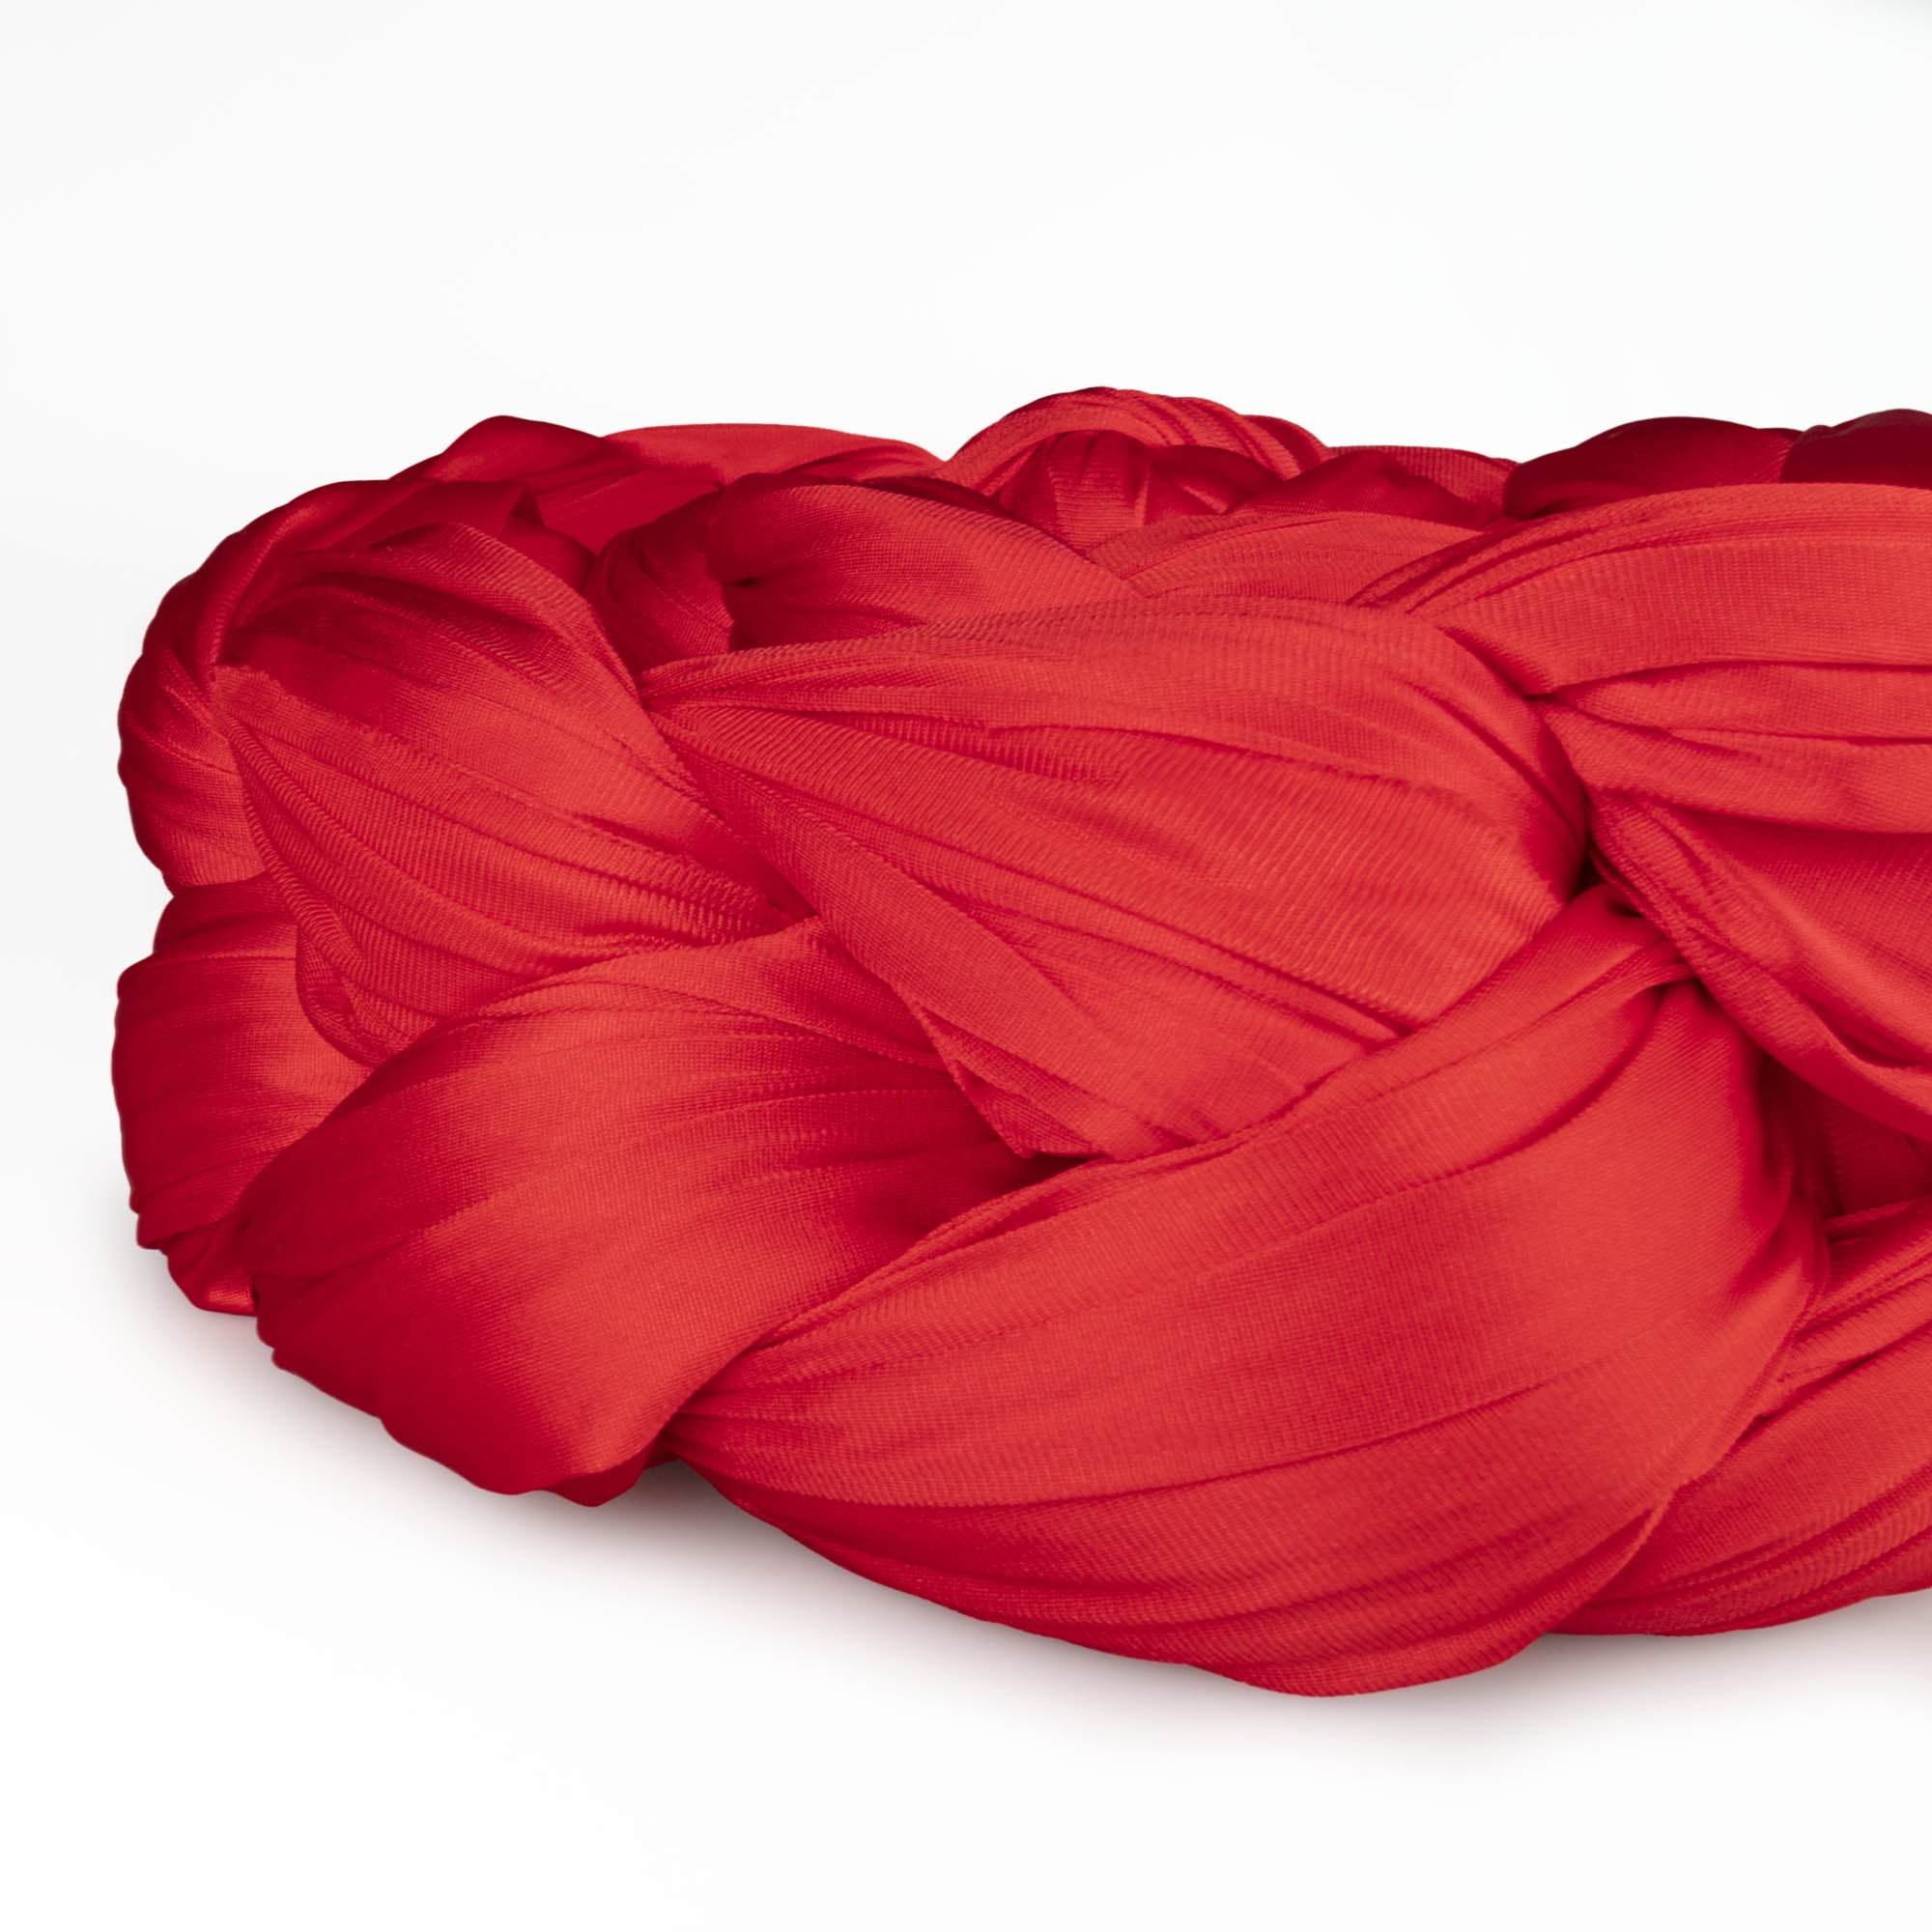 Red silk coiled